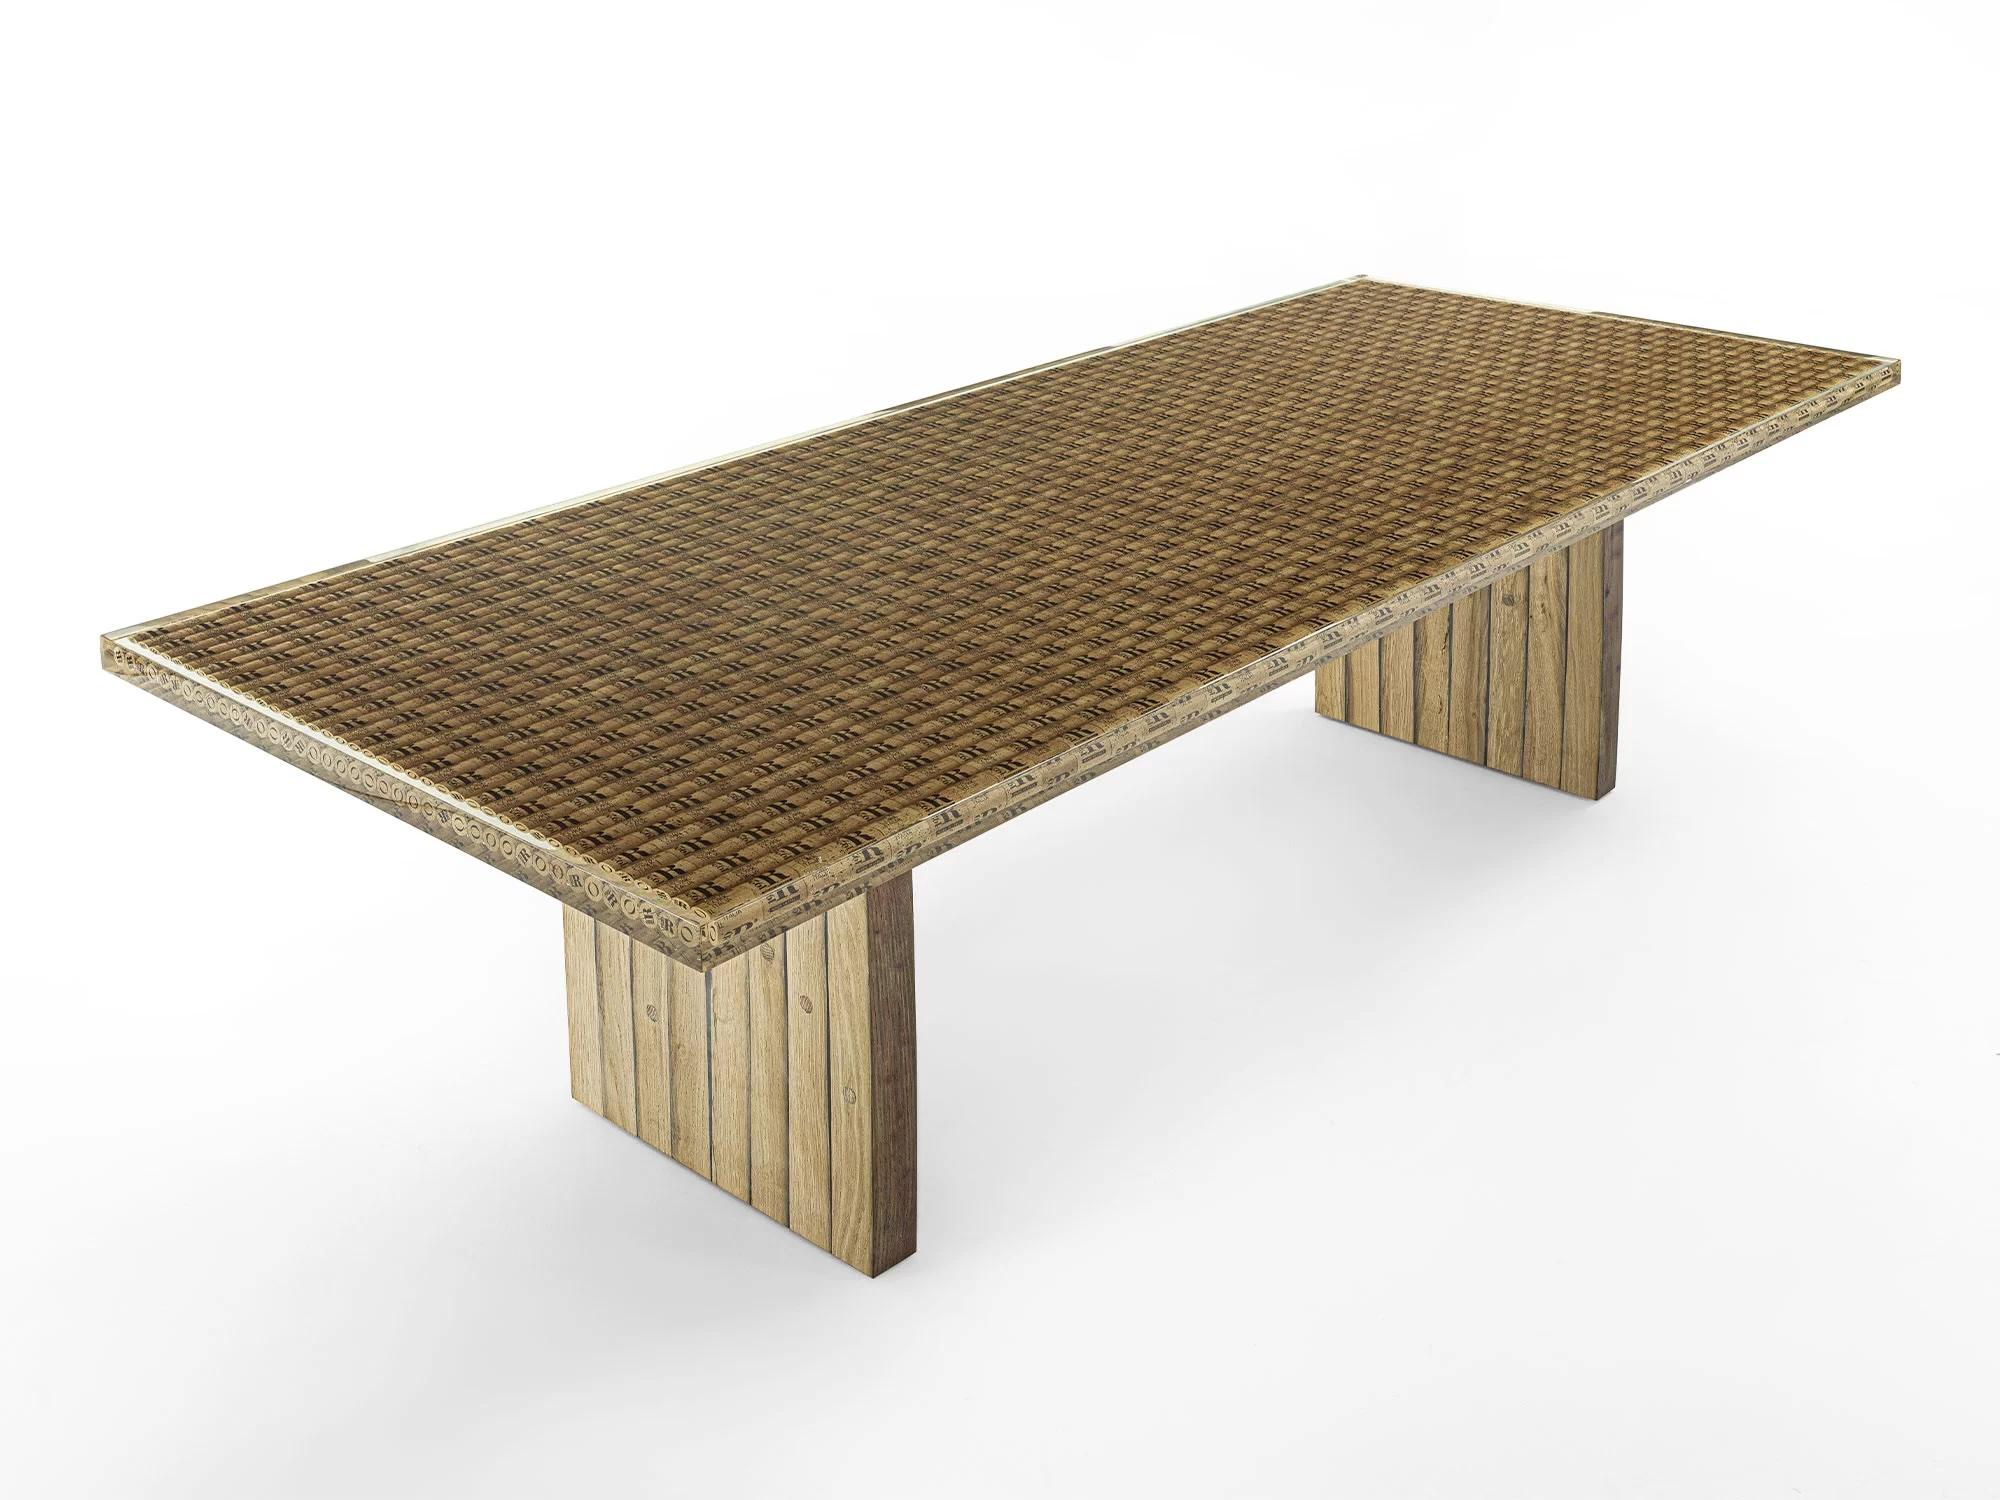 Table with an oak base created from Barriques and a top made of cork bottle stoppers coated in resin.

Designed by Authentic Design and Made in Italy 